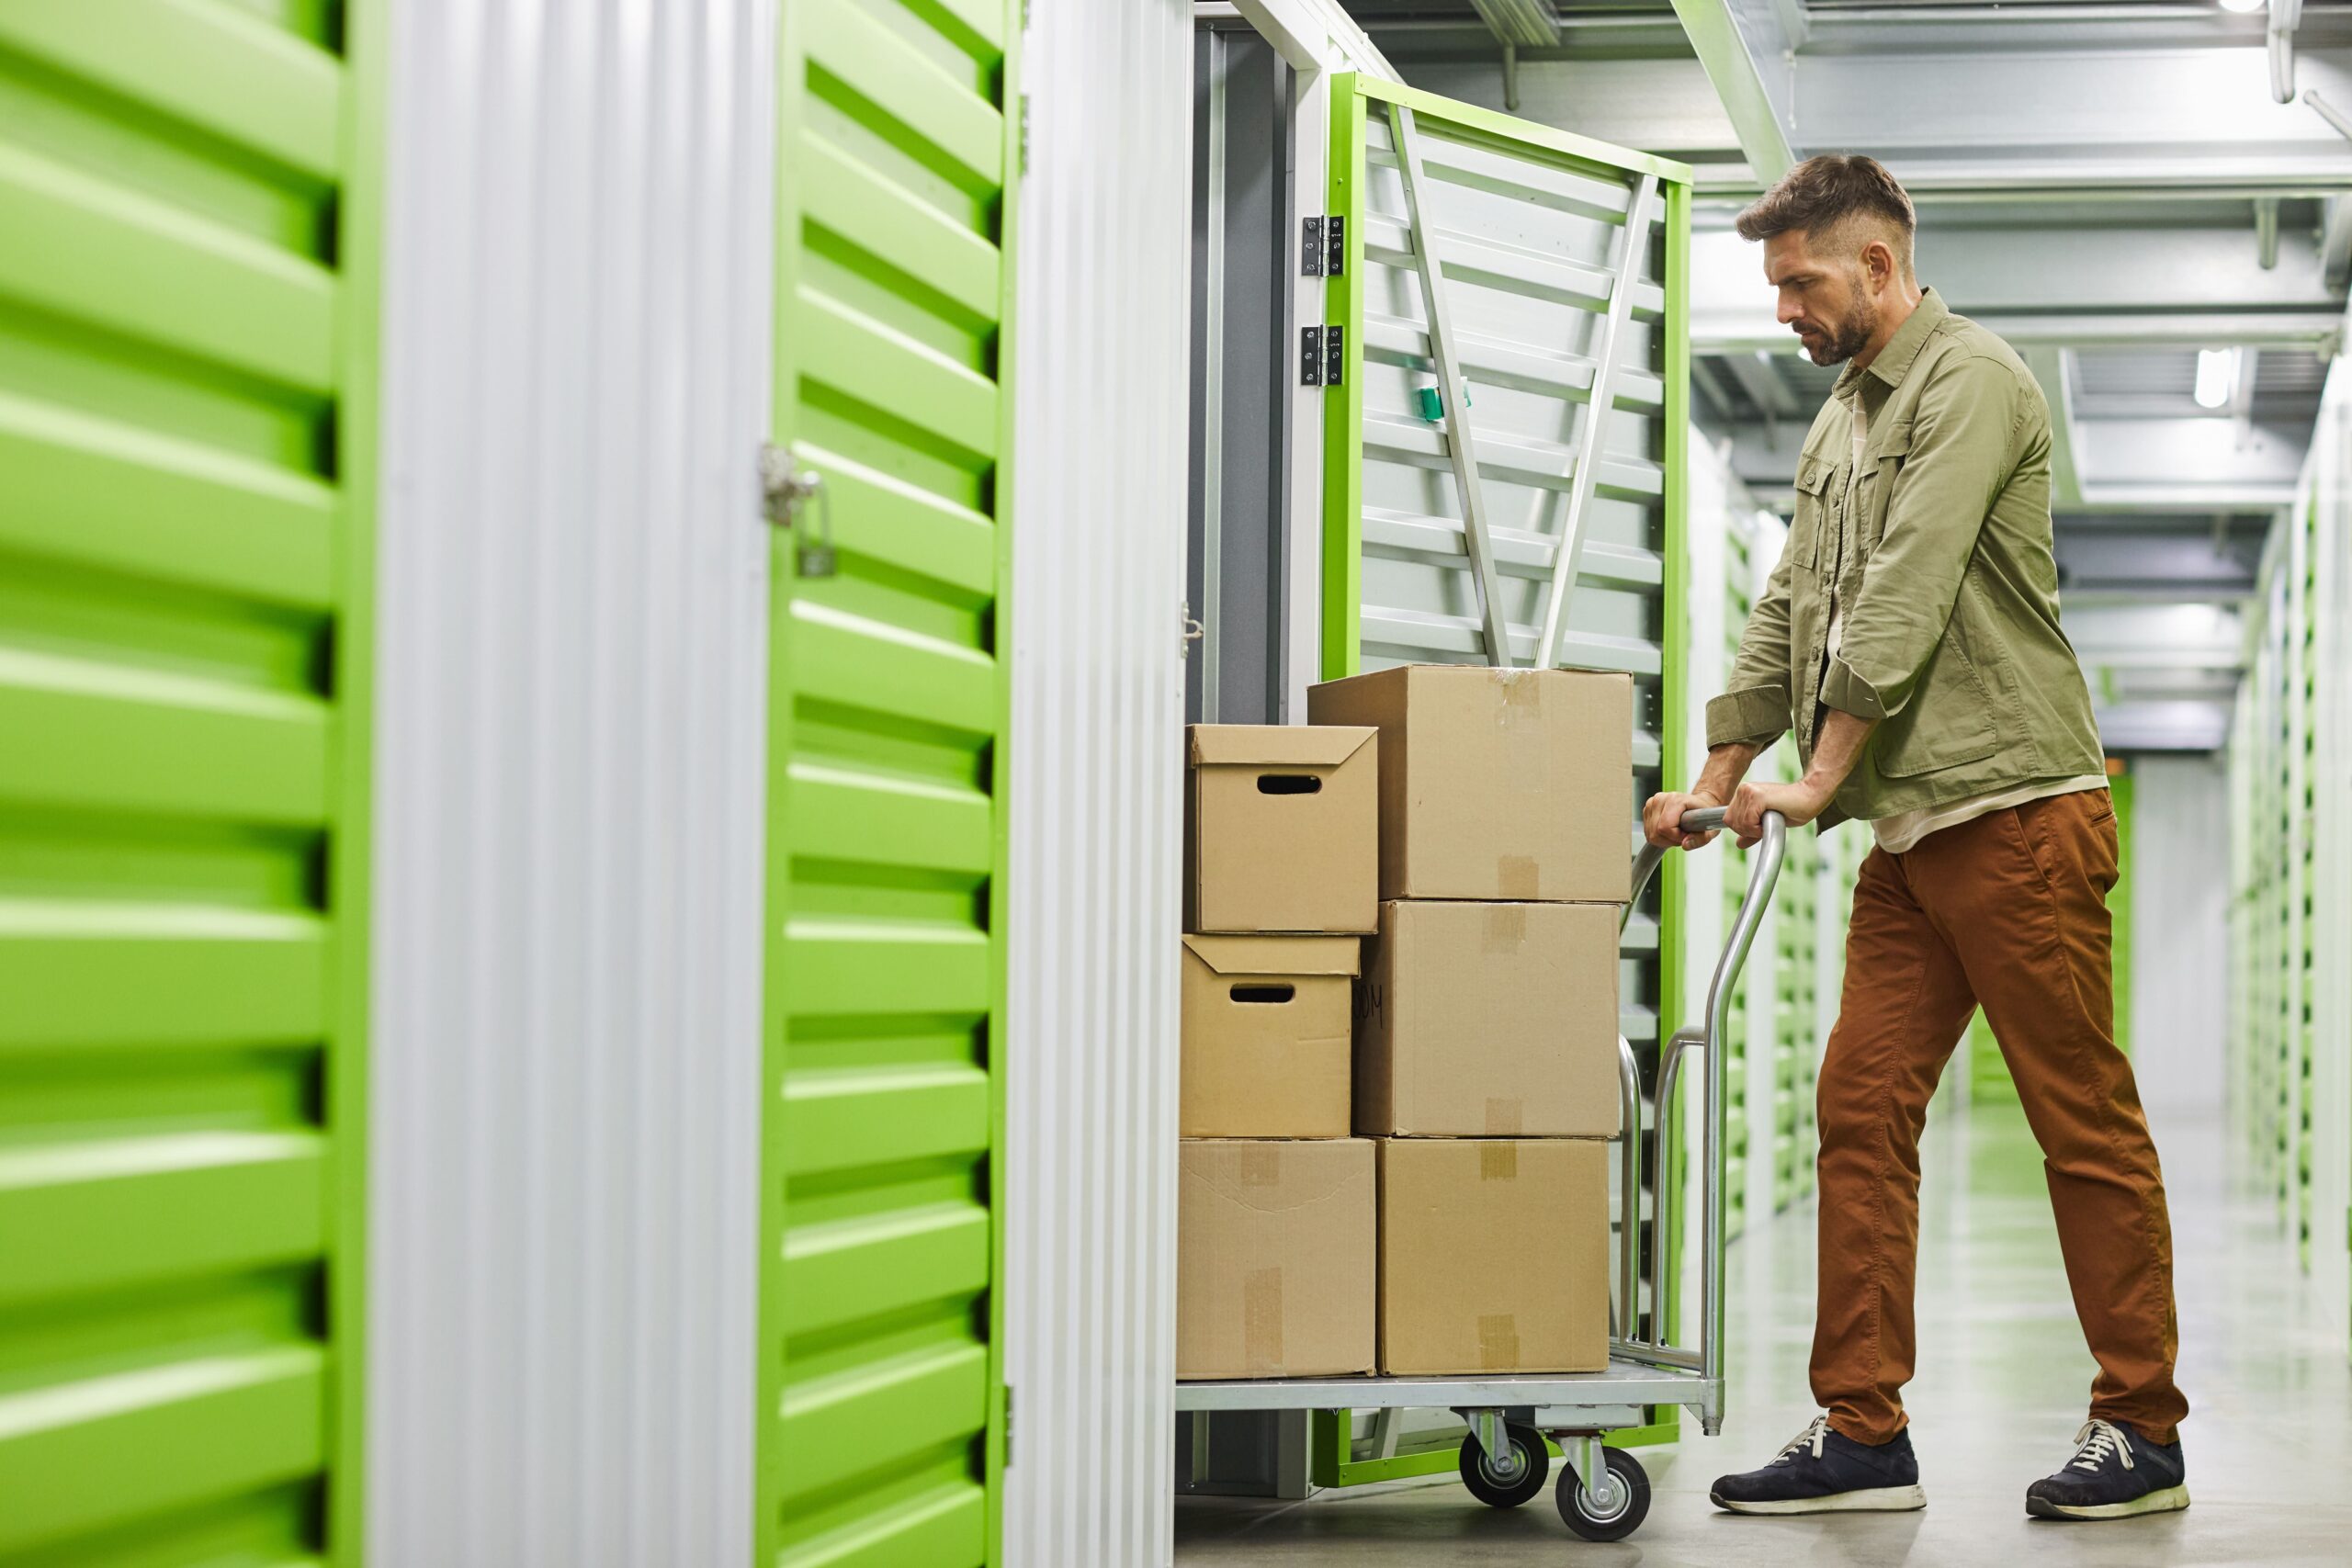 The Strategic Value of Self-Storage for Small Businesses